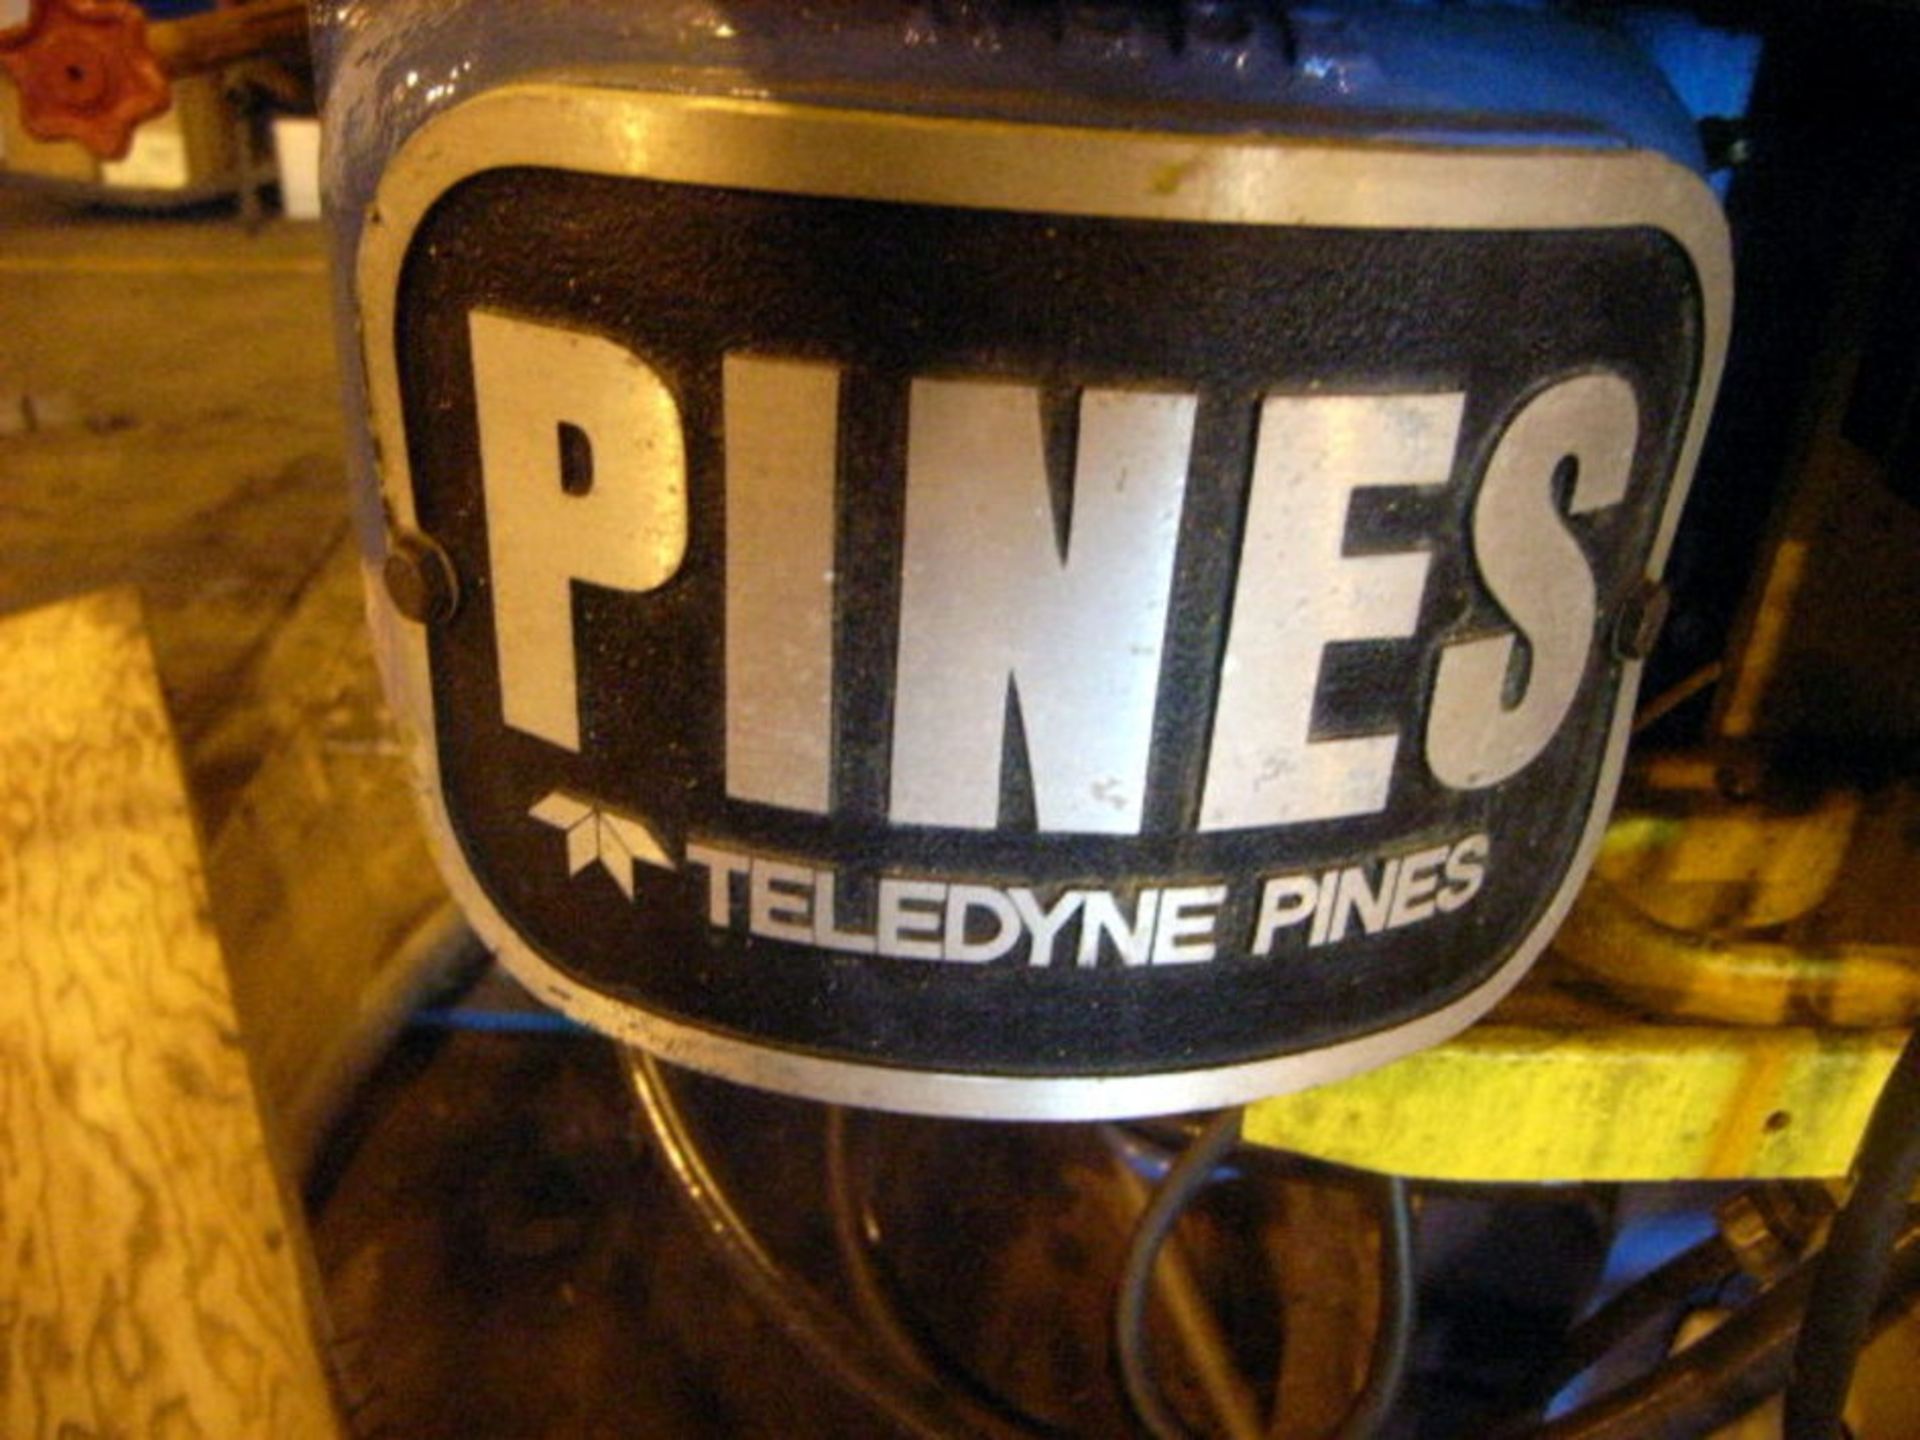 Pines Horizontal Hydraulic Tube Bender, 1 1/2" x 0.188", Mdl: #1 - Painesville, OH - 7116P - Image 8 of 35